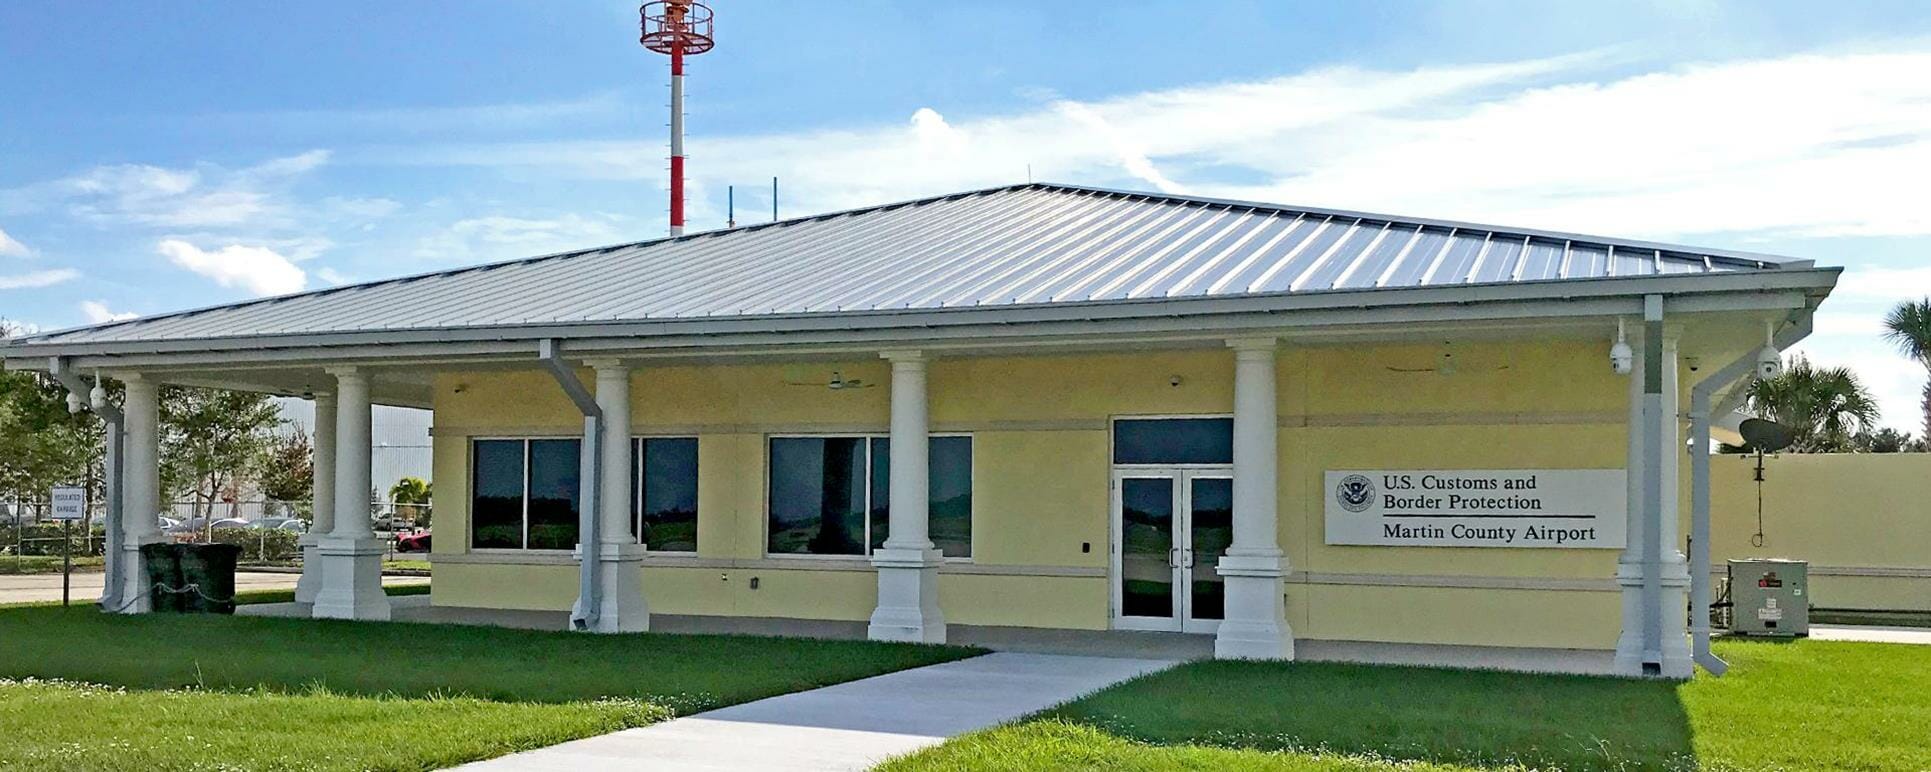 NEW CUSTOMS FACILITY COMES TO MARTIN COUNTY